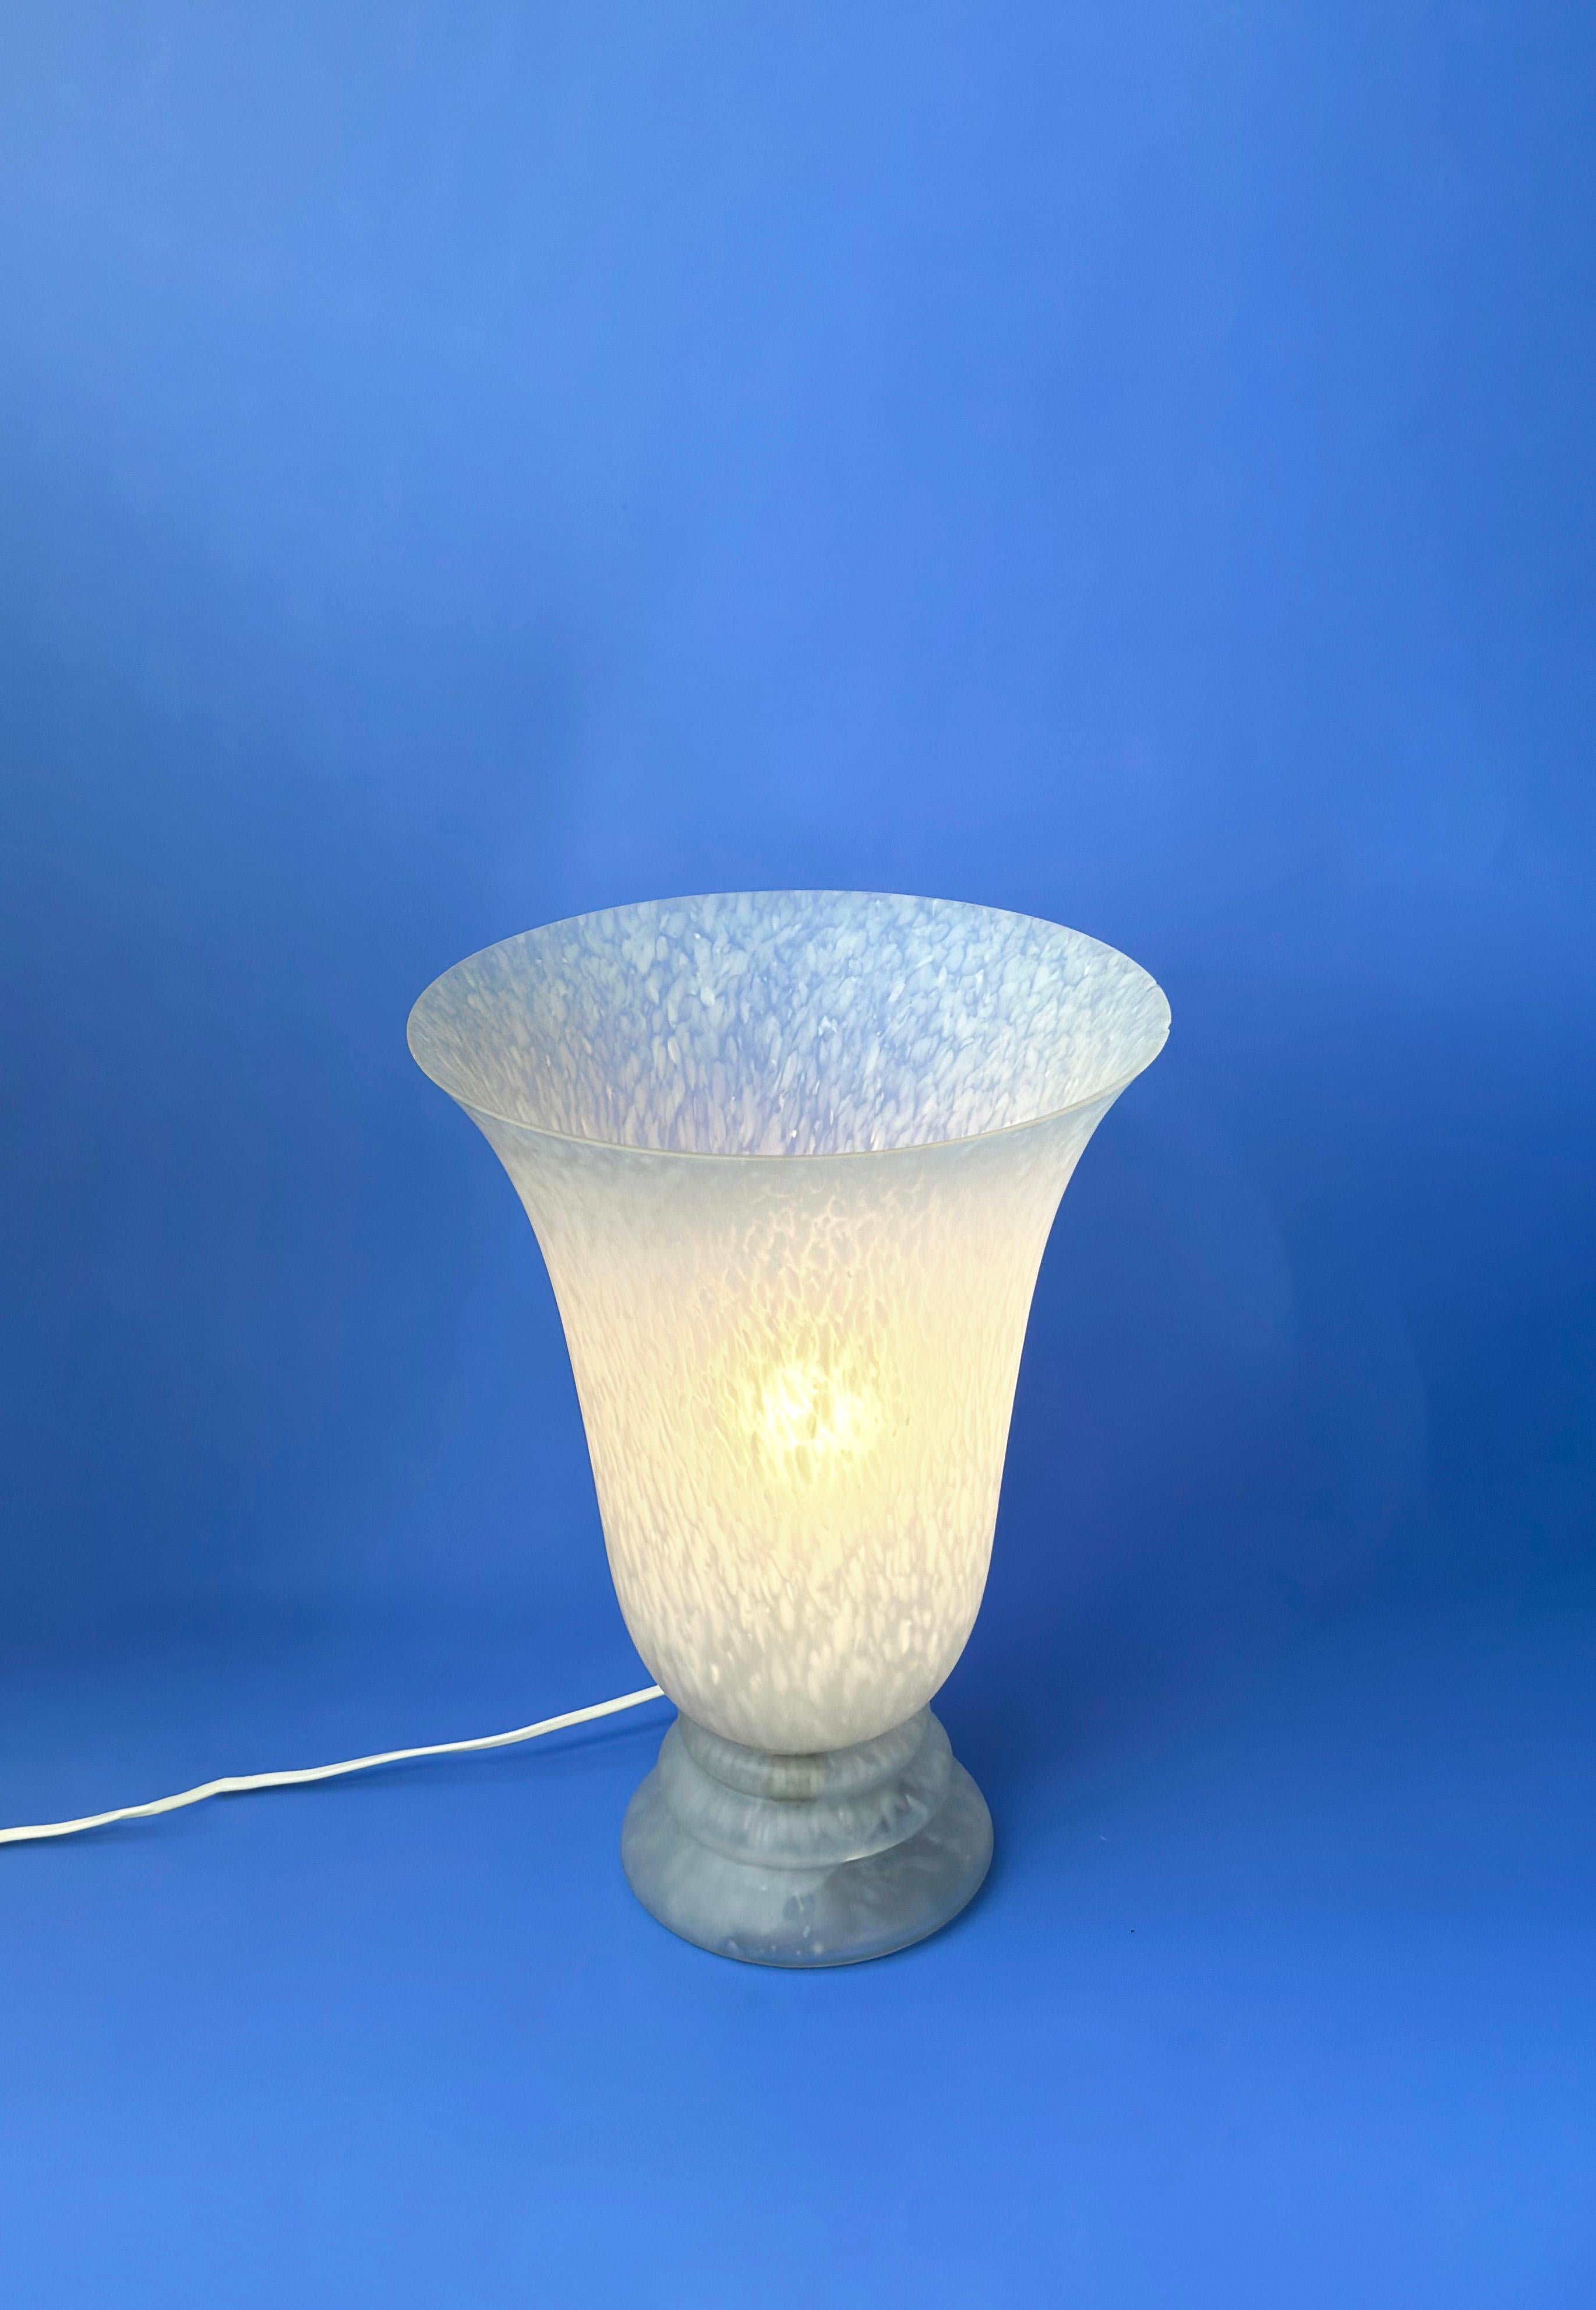 A vintage glass art deco style torchiere table lamp.

Crafted from soft dove grey and white rolled glass, the lamp's single-piece construction—both shade and base—exhibits a skilled blend of glass-blowing and moulding skills. The glass has been acid